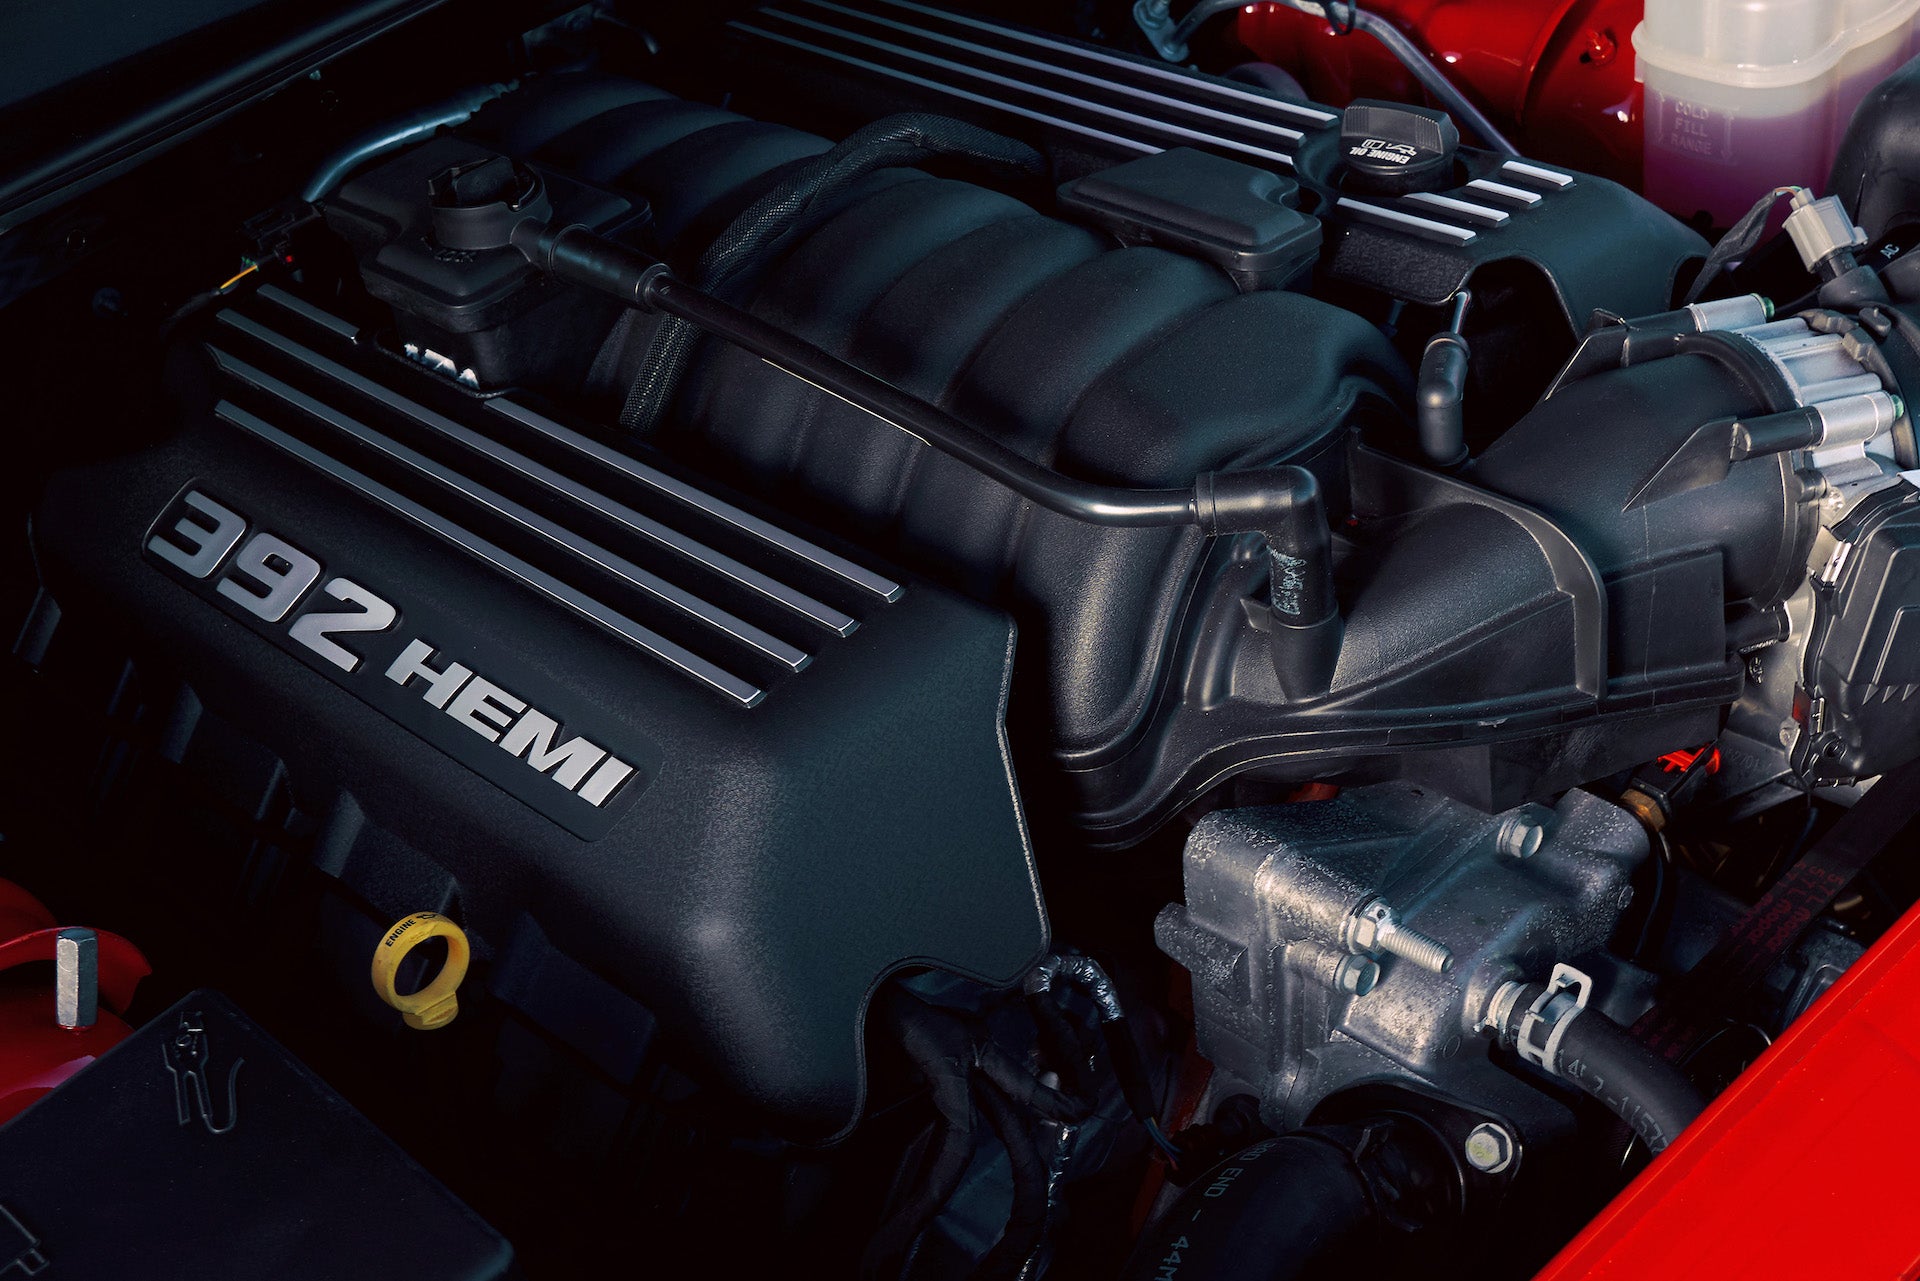 The 2022 Dodge Challenger R/T Scat Pack continues to offer the proven, naturally aspirated, 392-cubic-inch HEMI® V-engine engine featurig 485 horsepower and 475 lb-ft of torque.